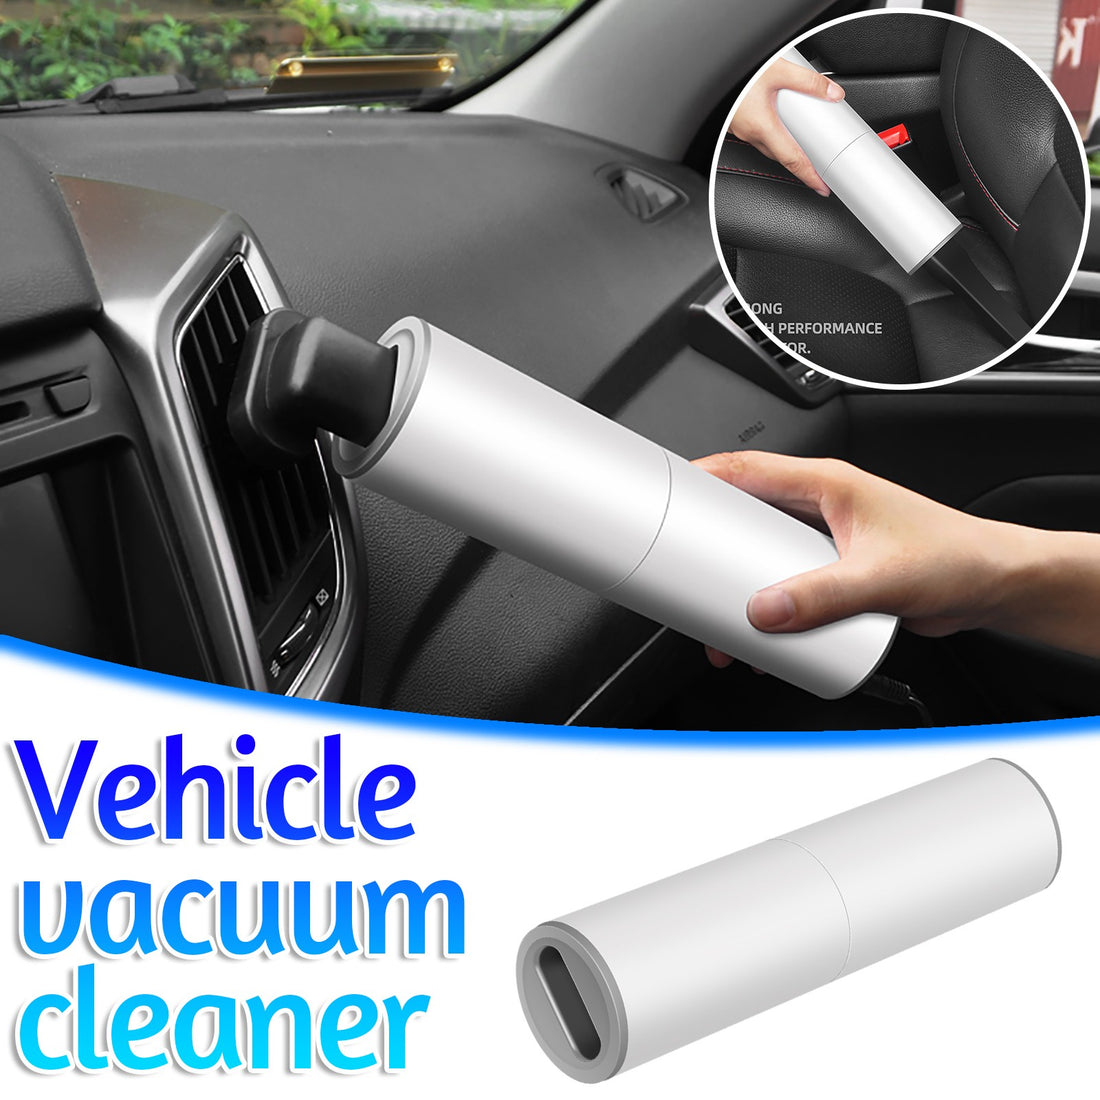 NEW Portable Handheld Vacuum Cleaner 120W Car Charger